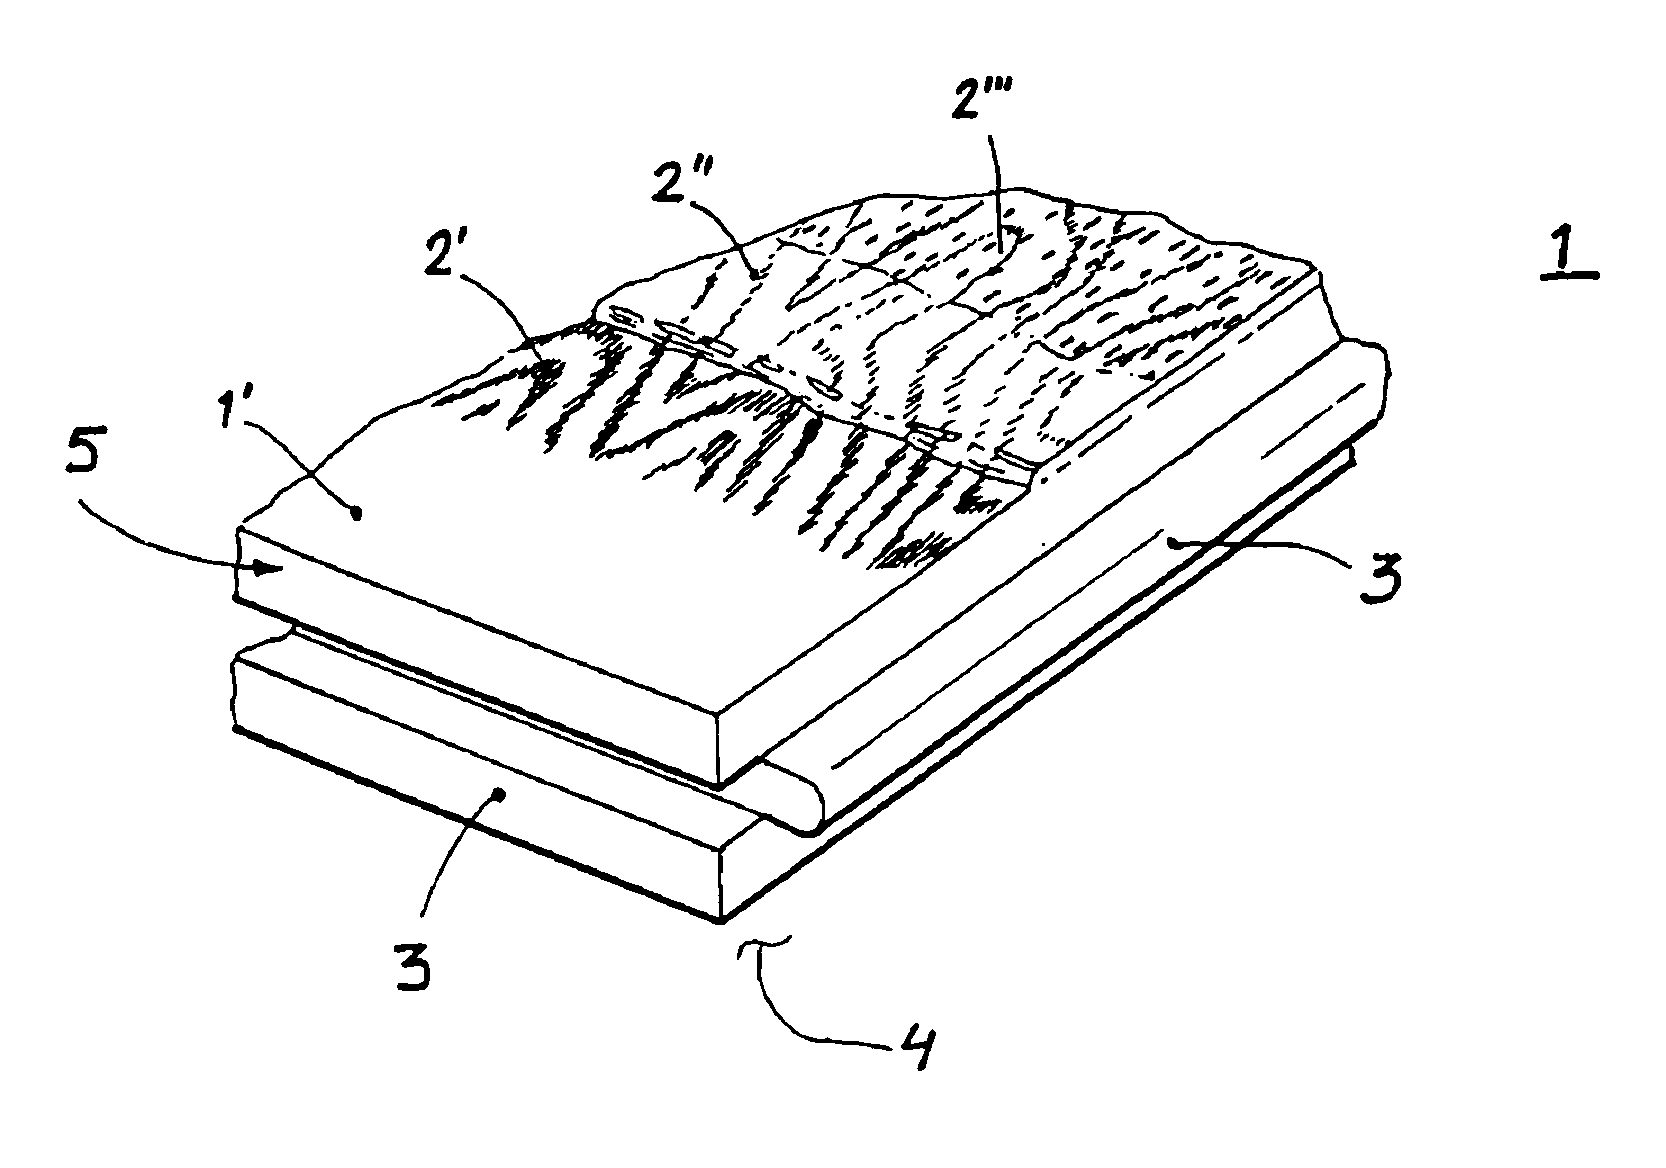 Process for the manufacturing of surface elements with a structured top surface